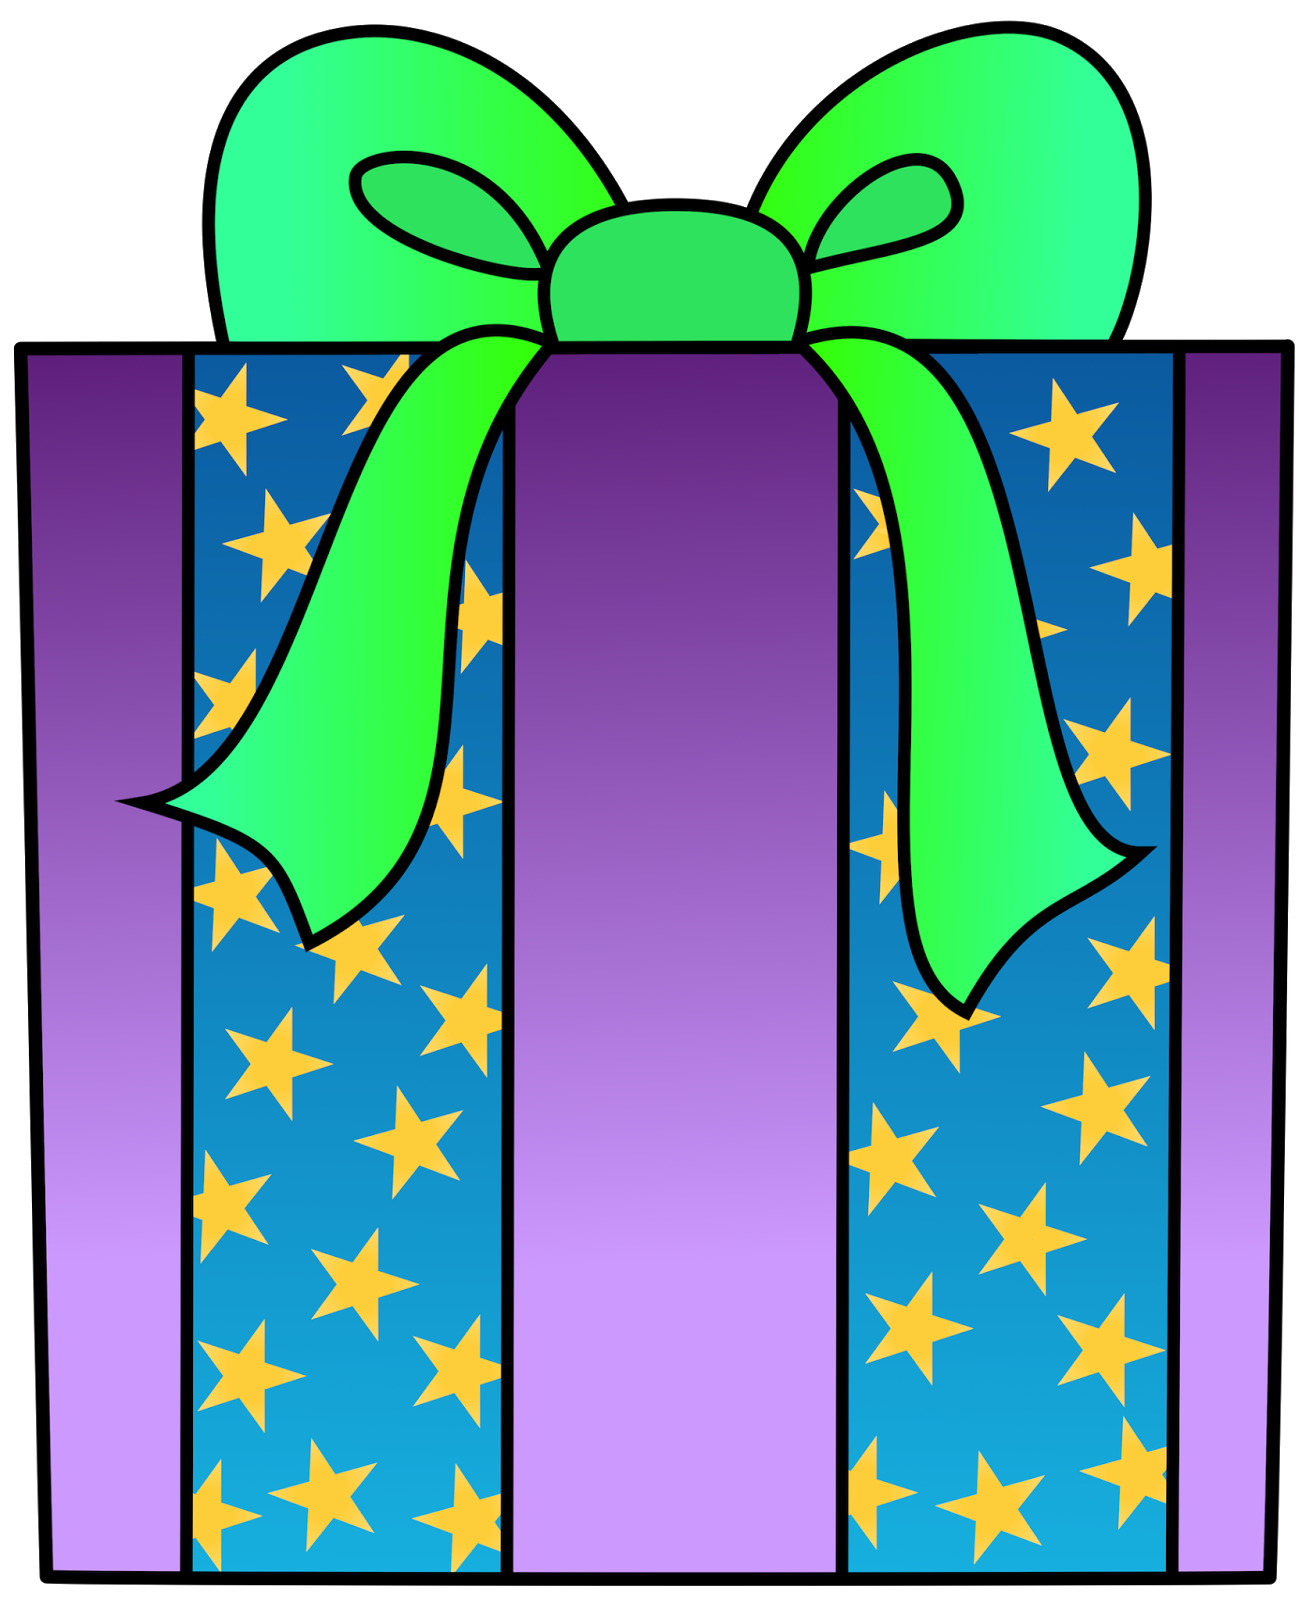 Happy birthday present clipart free images 2